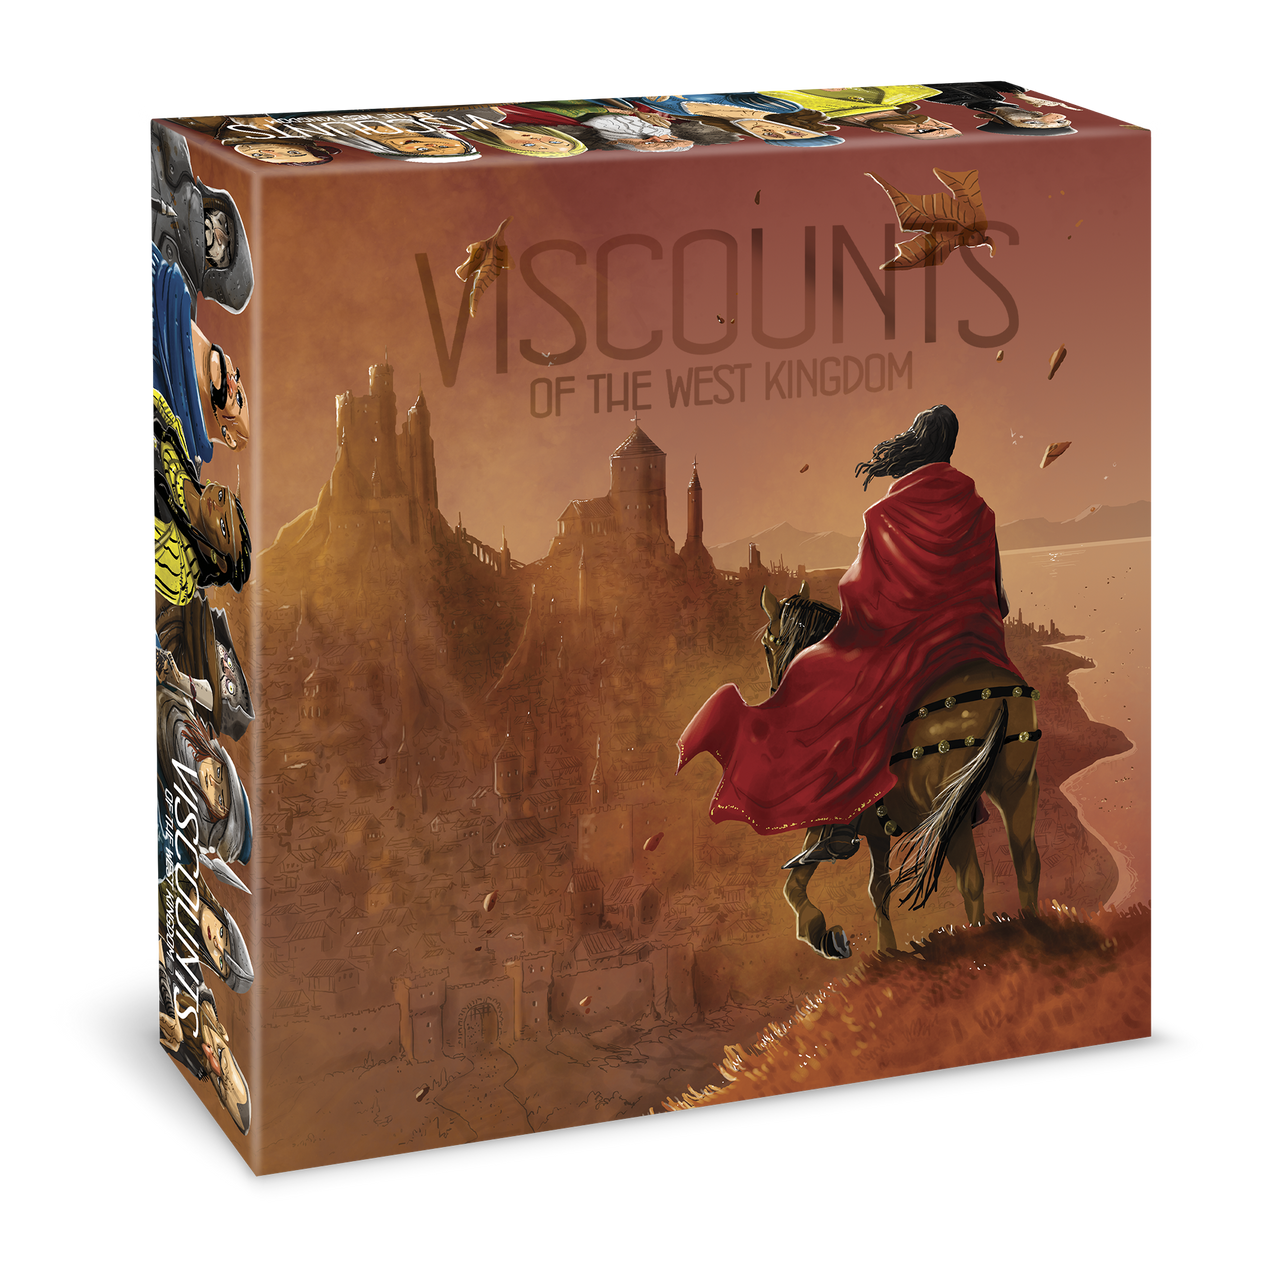 Viscounts of the West Kingdom：Collector's Box - [GoodMoveBG]